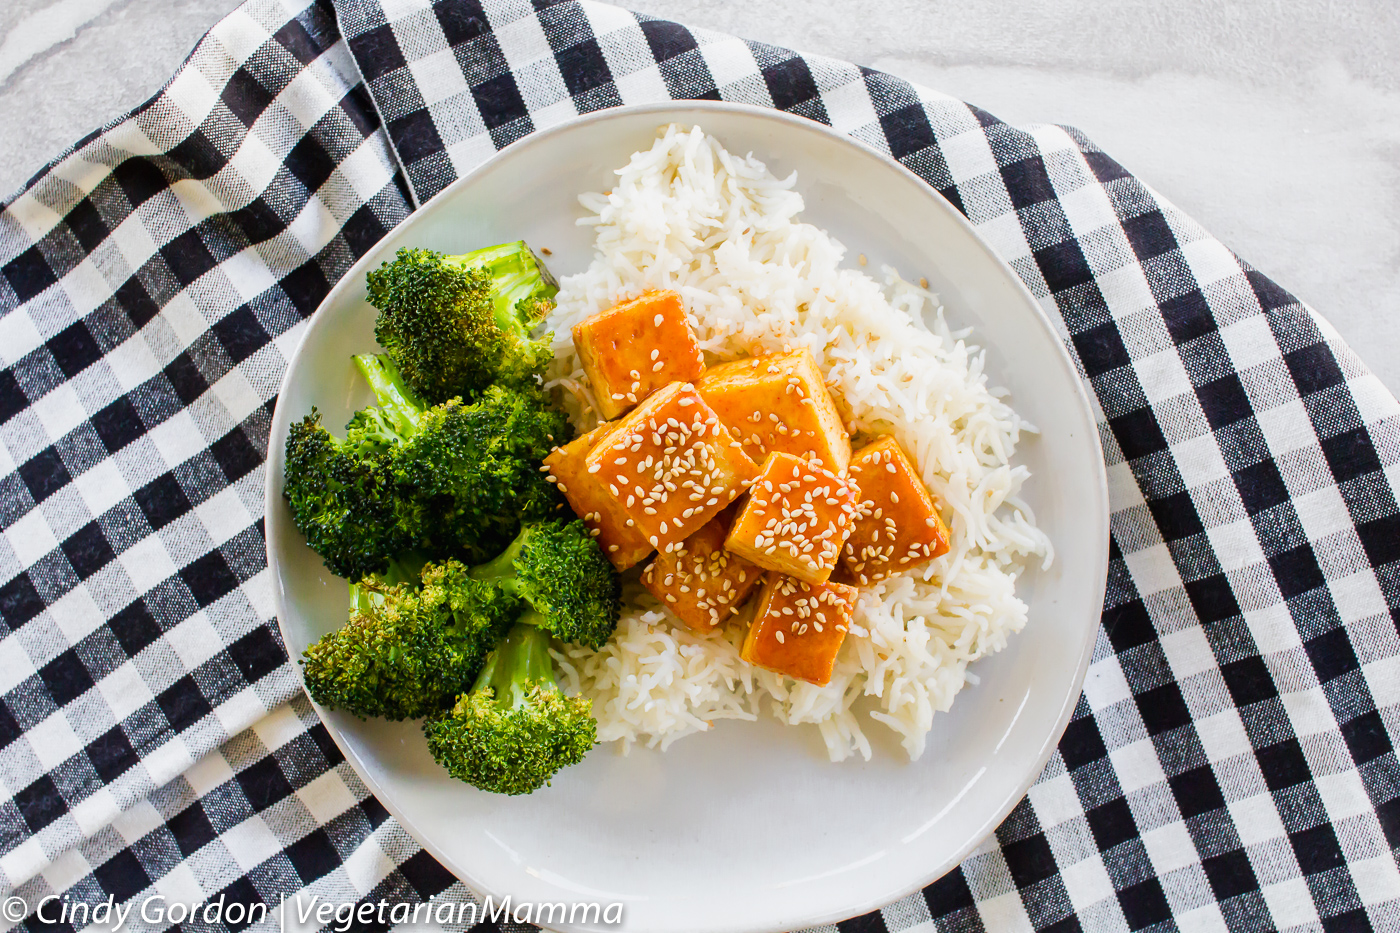 top down view of a plate of broccoli, rice, and tofu topped with sesame seeds